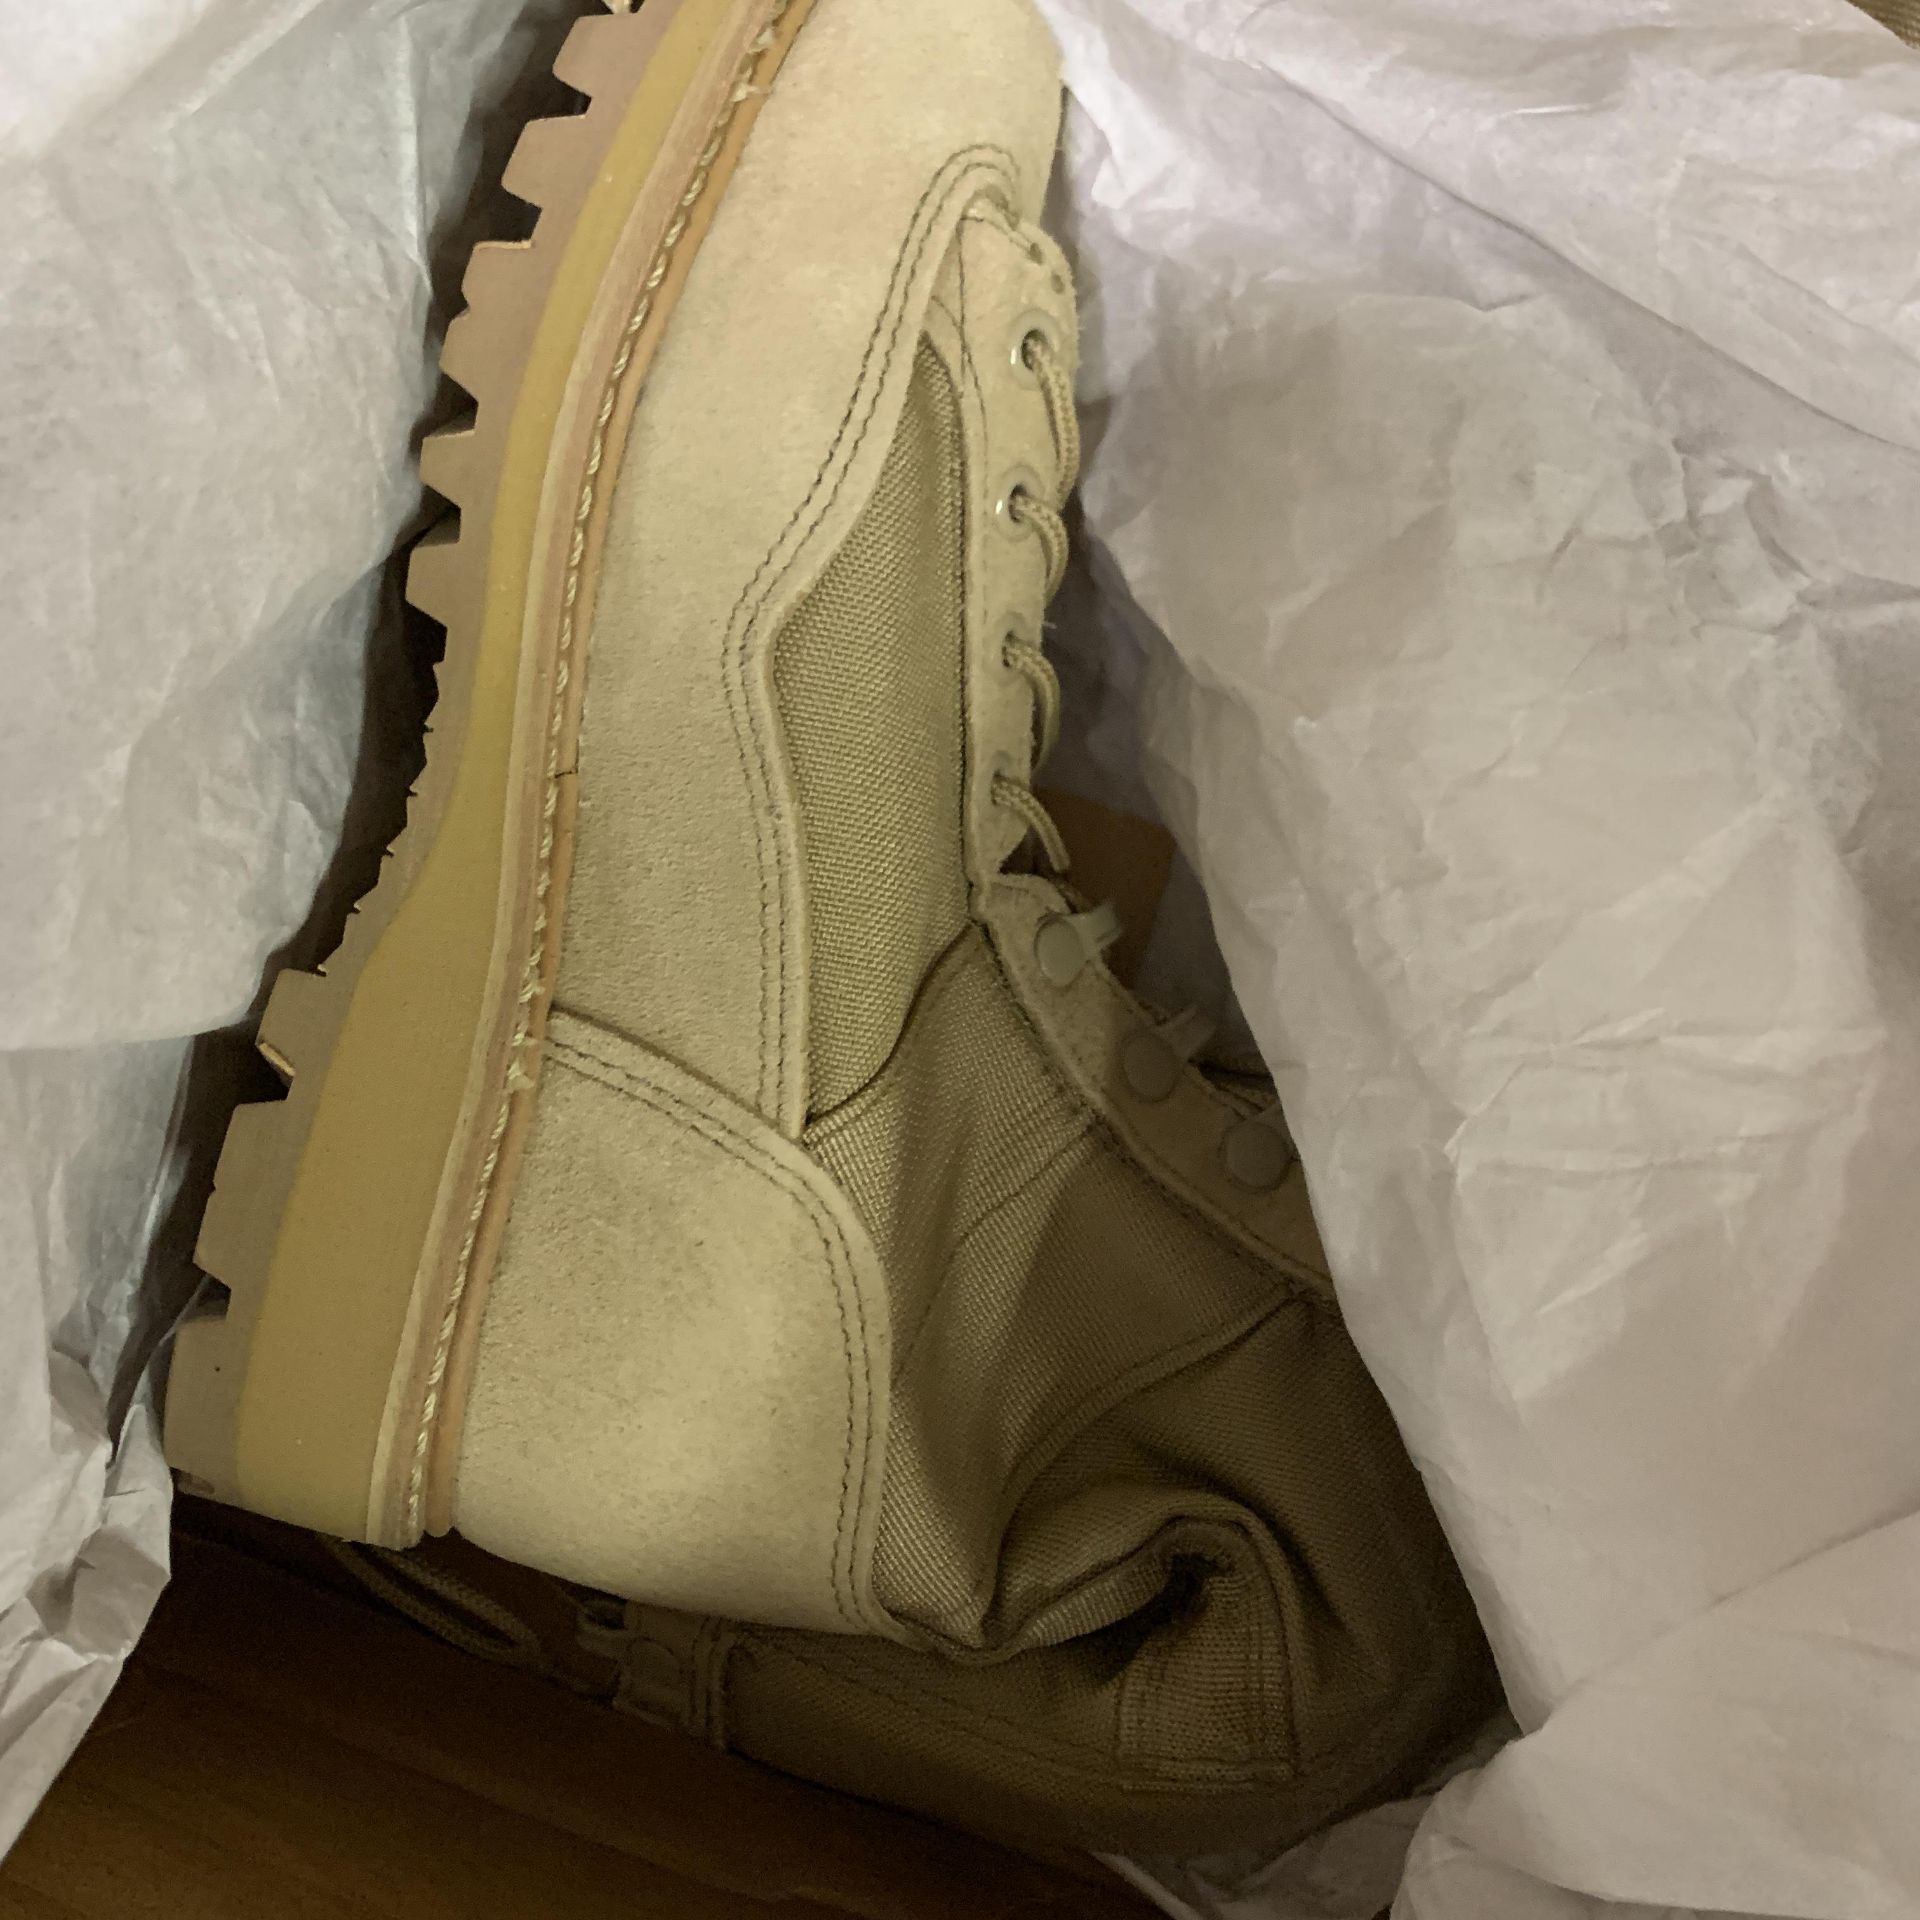 8 Pairs of Corcoran Desert Combat Boots, Tan 4380, Various Sizes, Retail Value $400++ - Image 2 of 4